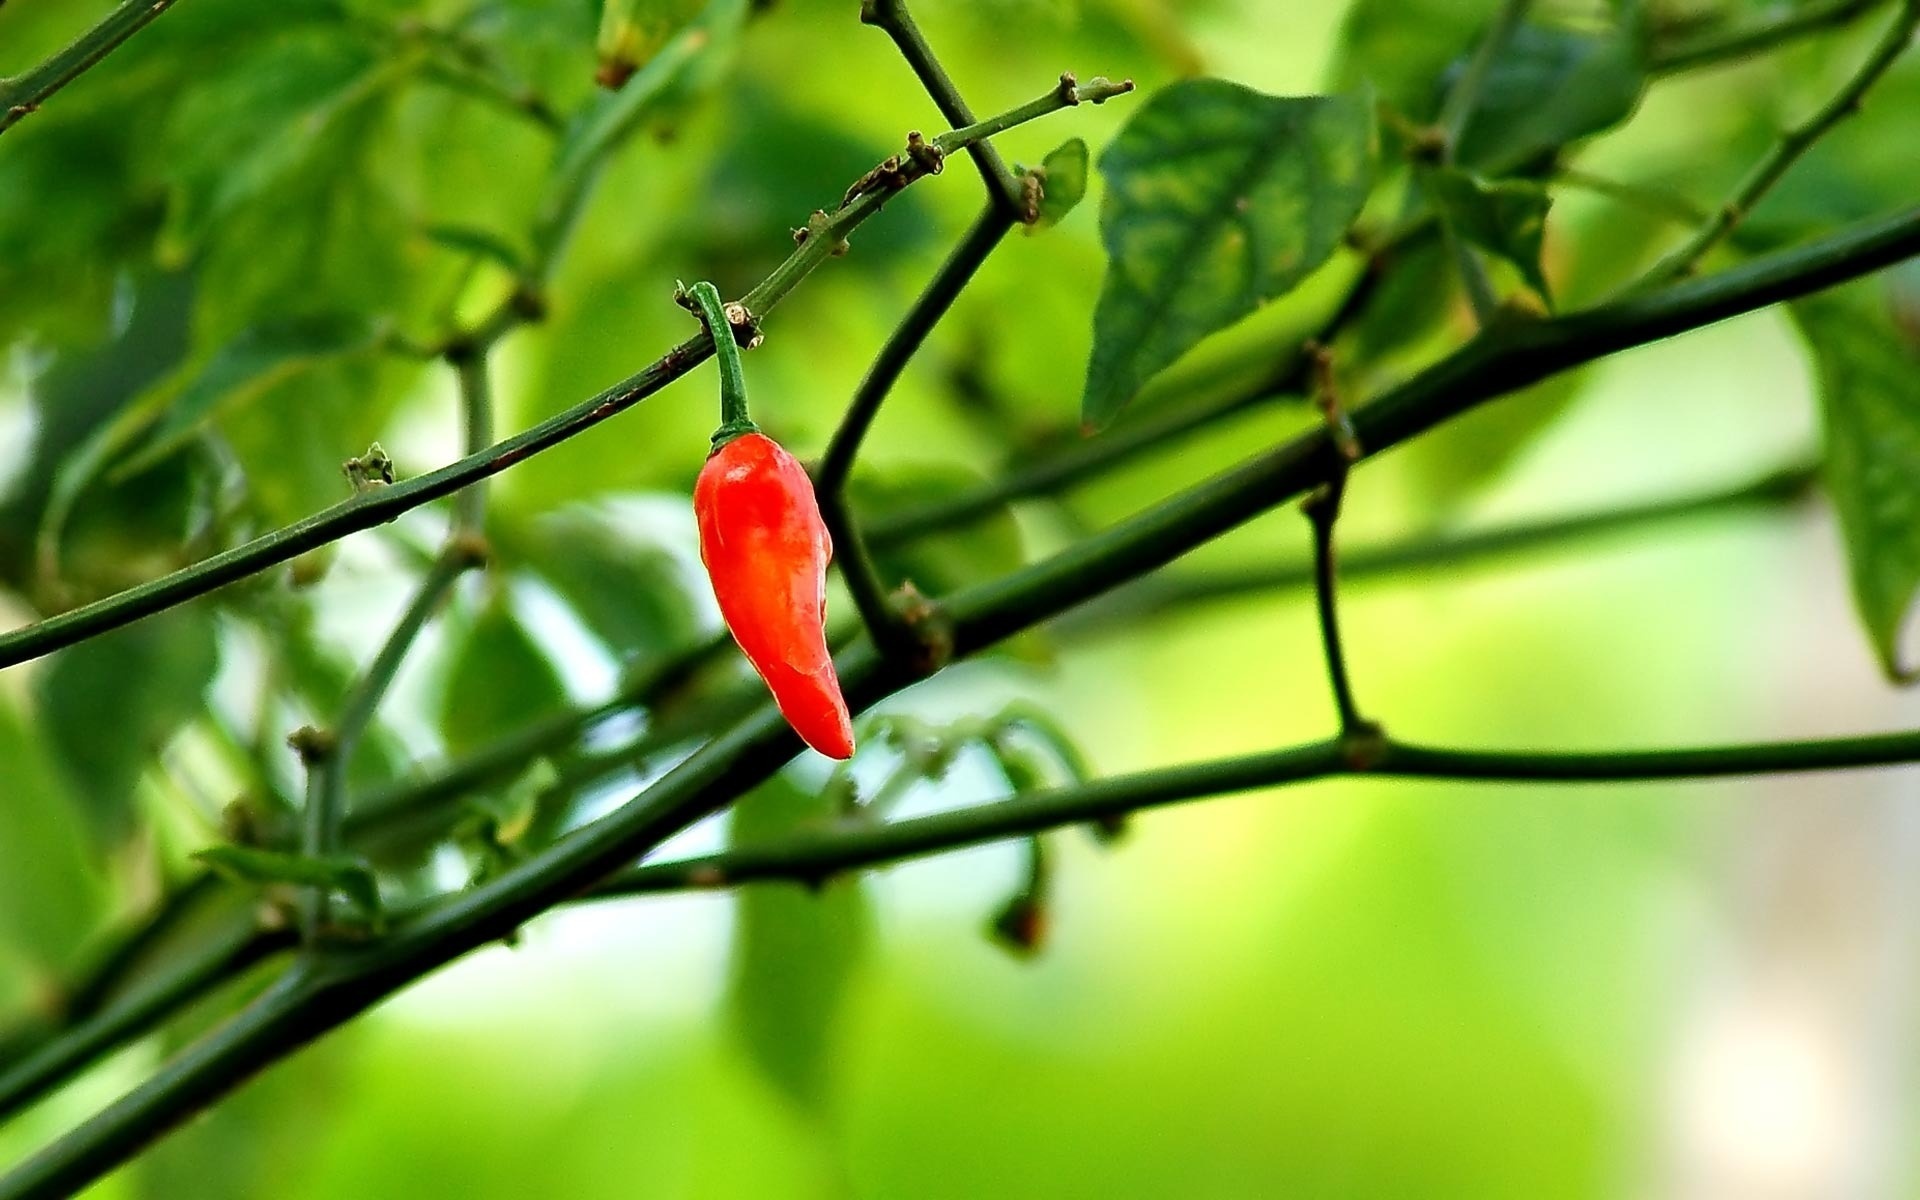 chili, pepper, red, branch, tree, green, leaves